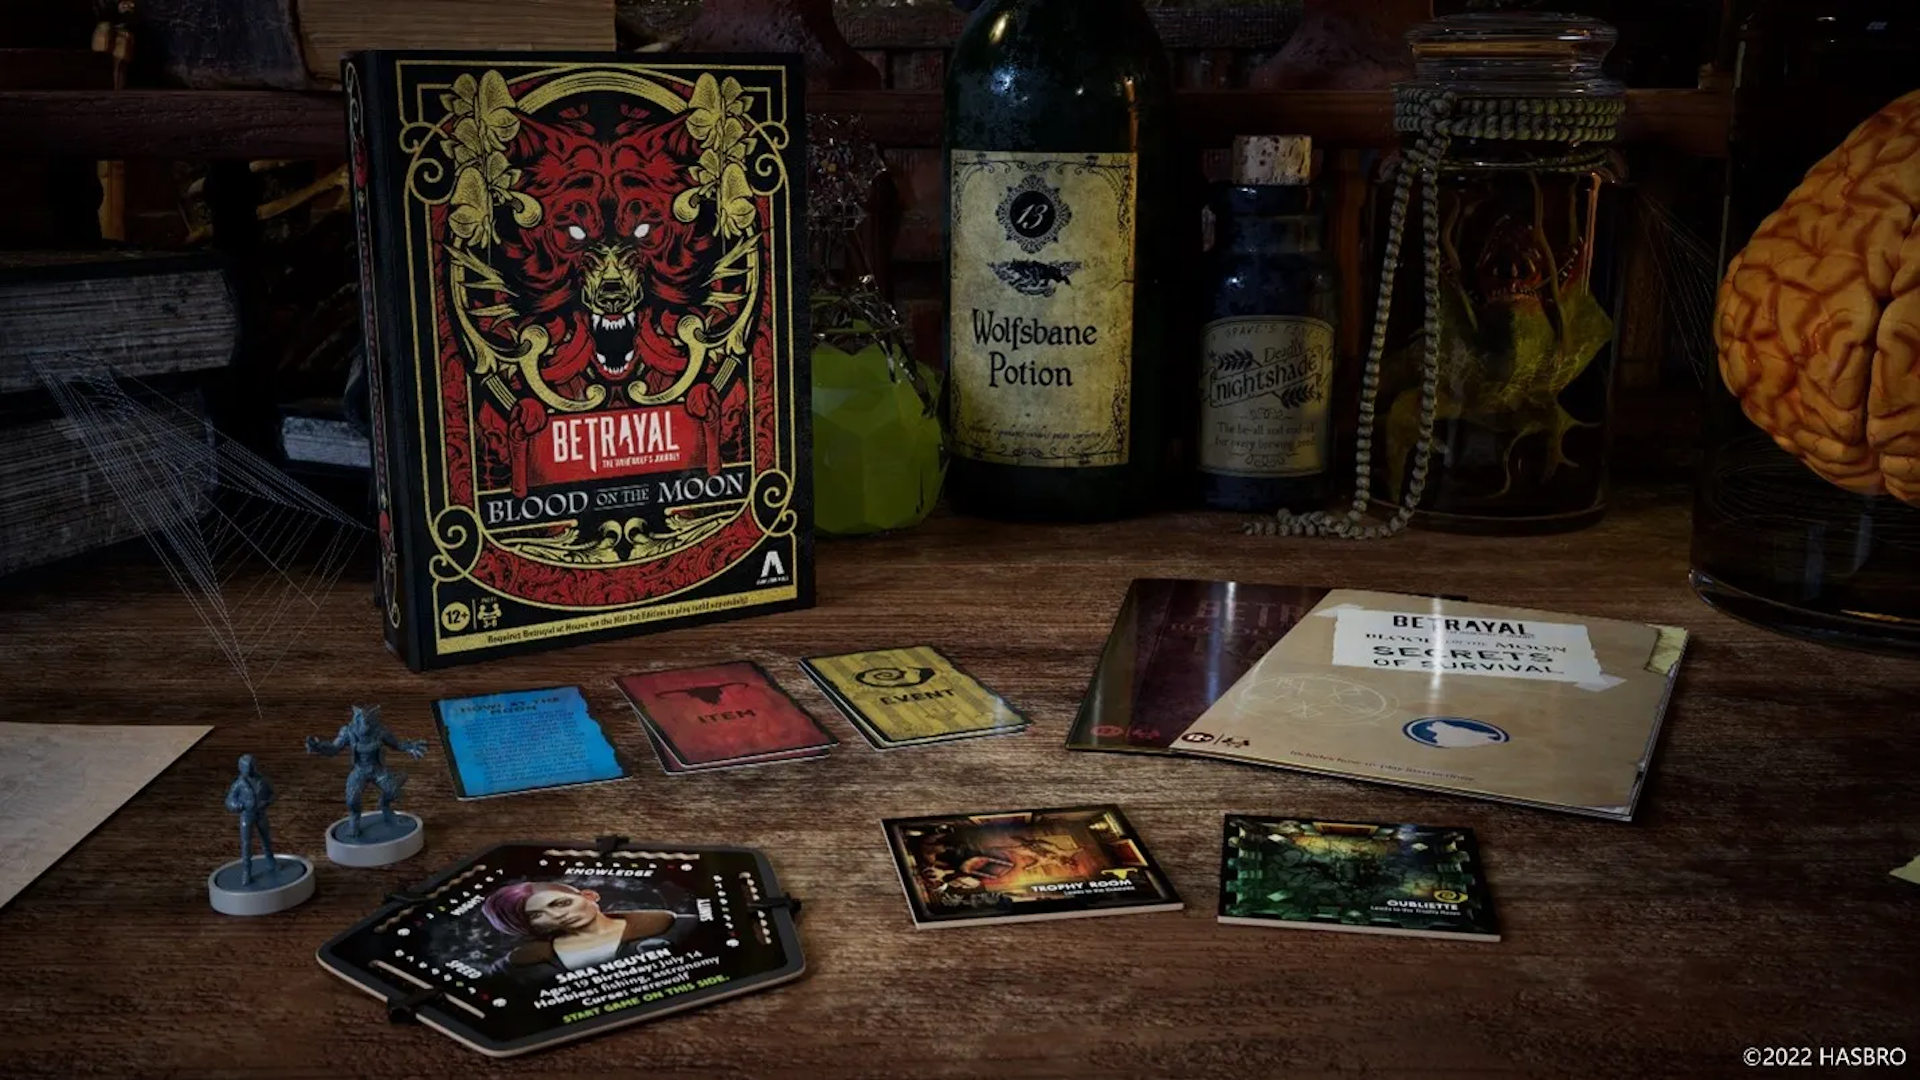 A promotional shot for Betrayal at House on the Hill's first expansion, The Werewolf’s Journey: Blood on the Moon. It shows off the new components and the box, which has a snarling wolf's head in crimson red and gold.